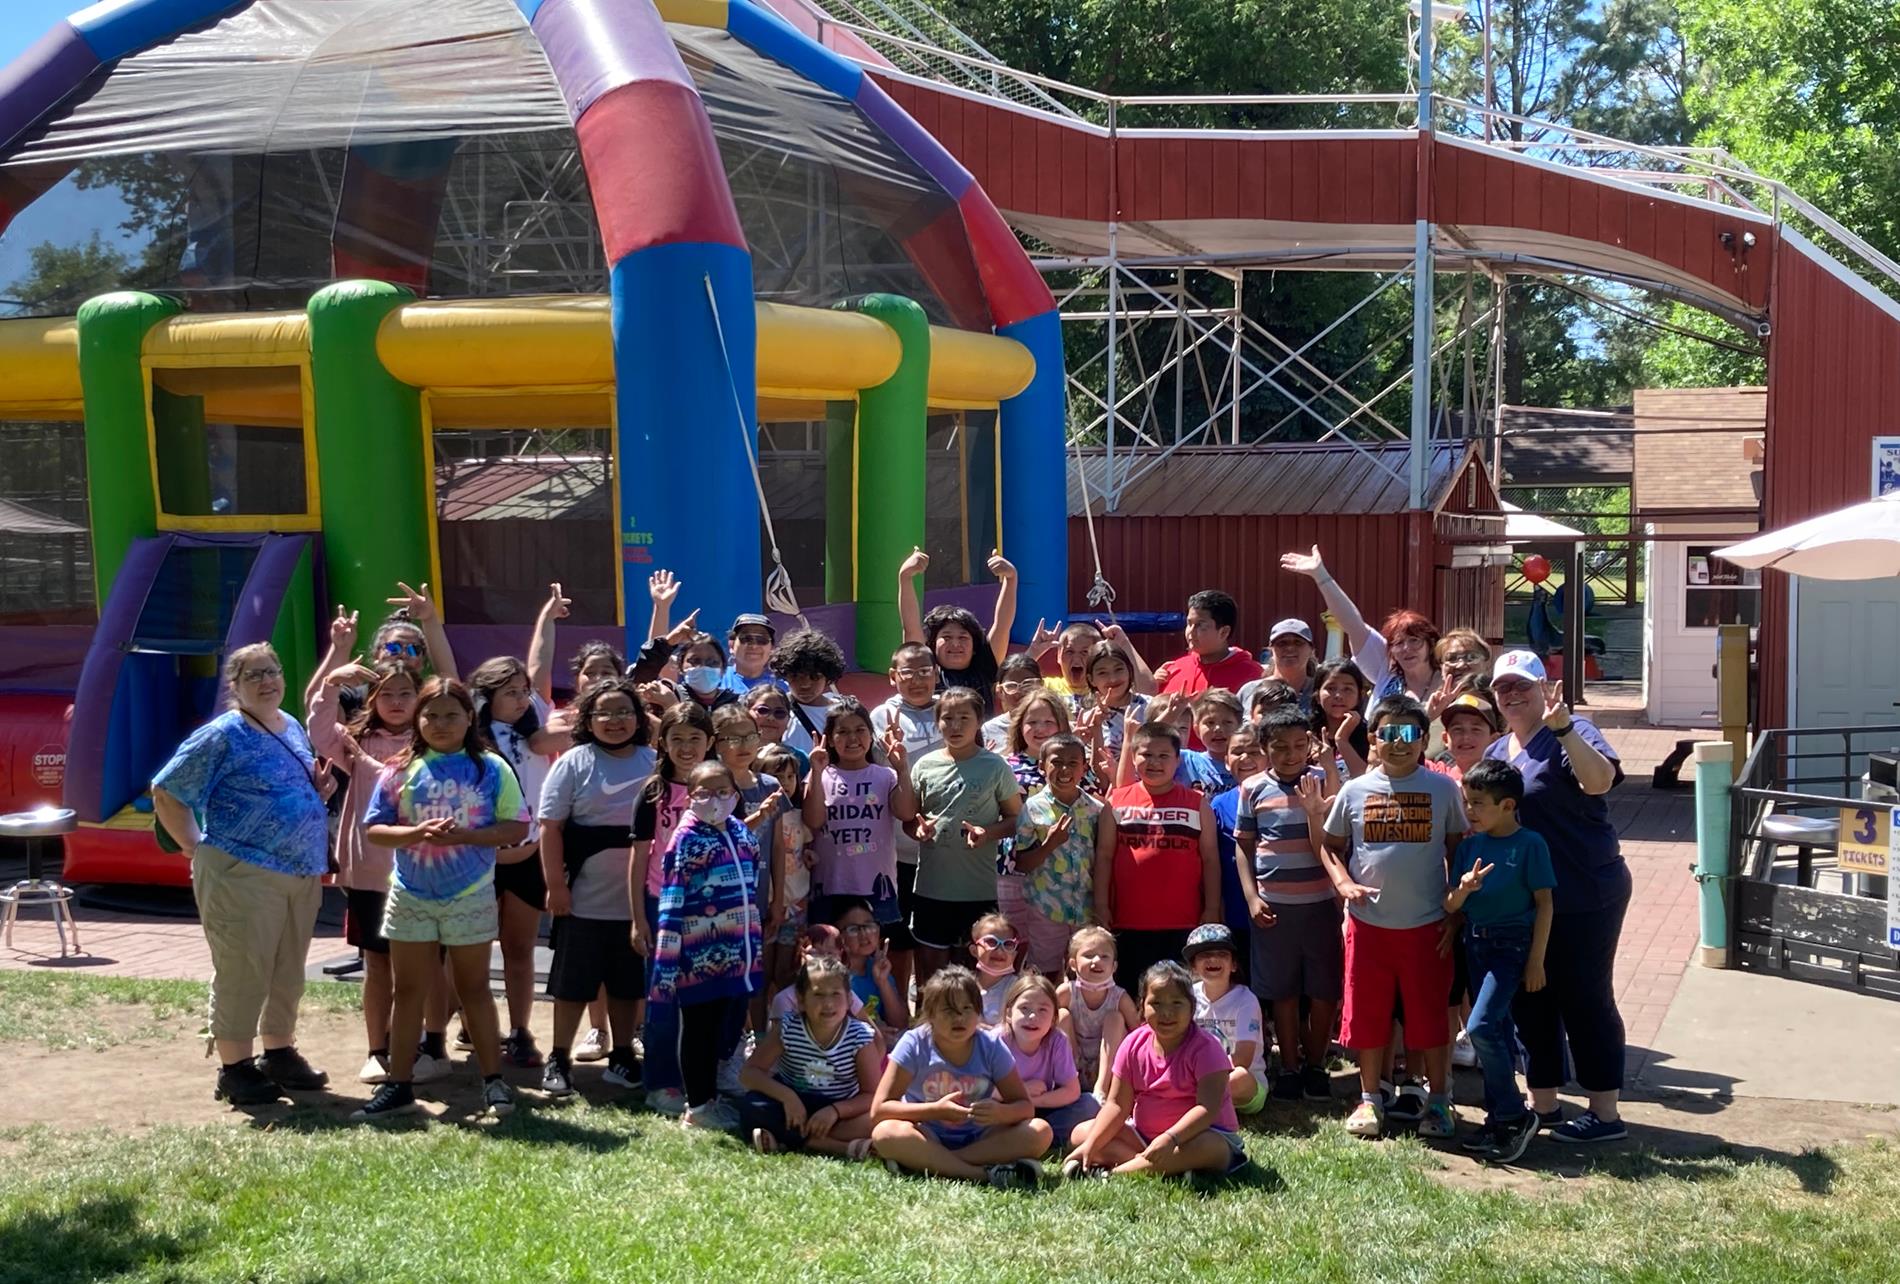 Group photo of staff and students at Super Slide Amusement Park